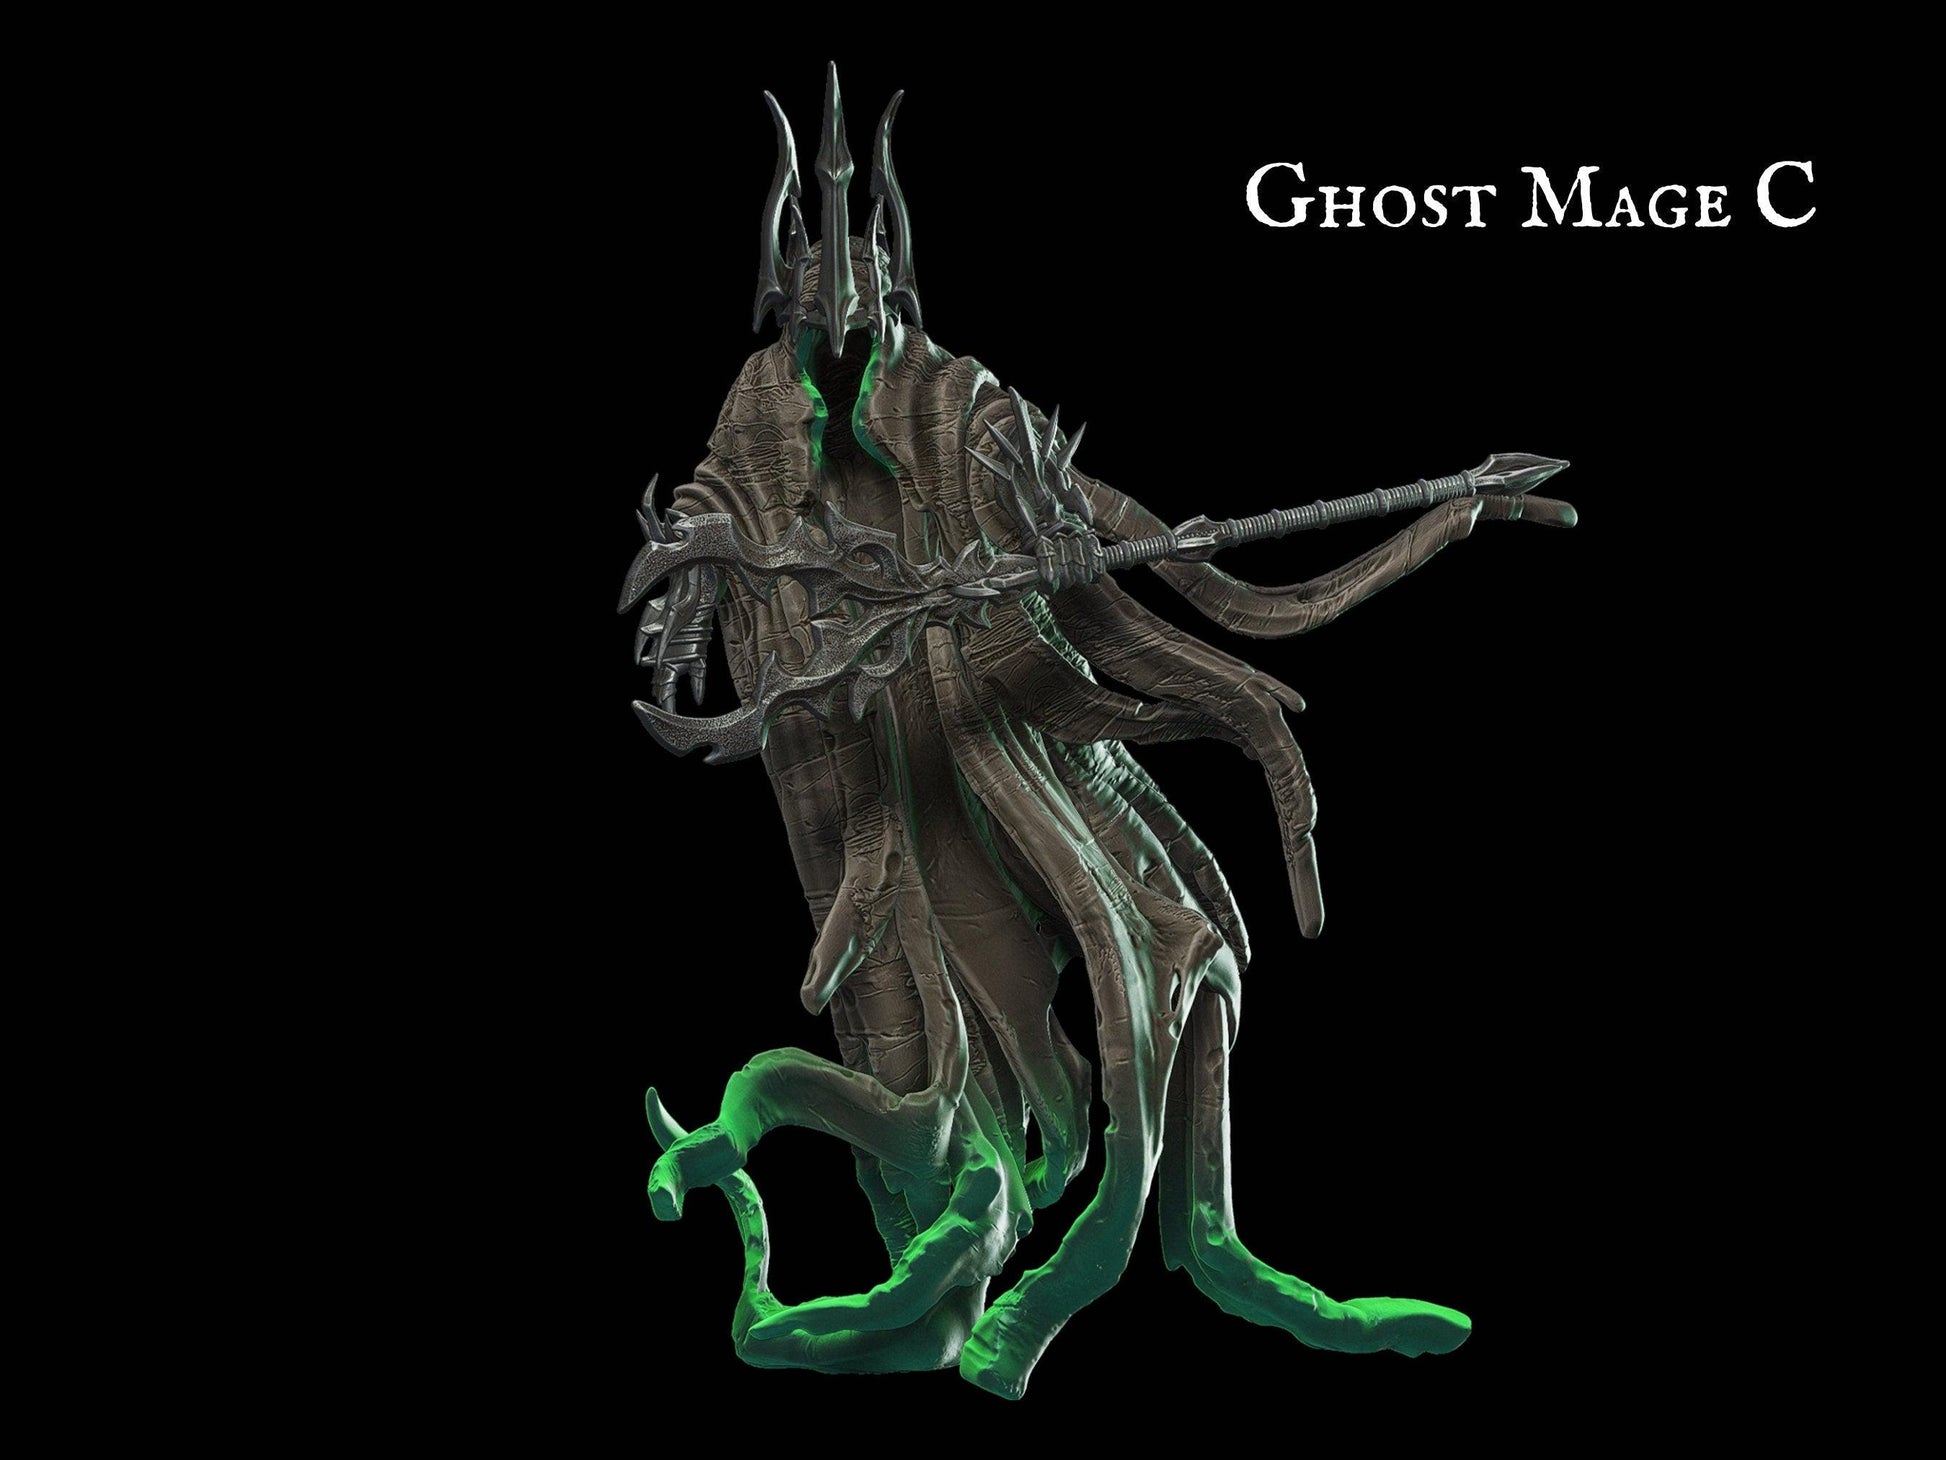 Mage Ghost Miniature ttrpg miniature - 28mm scale Tabletop gaming DnD Miniature Dungeons and Dragons, Mage miniature, dnd 5e wargaming - Plague Miniatures shop for DnD Miniatures